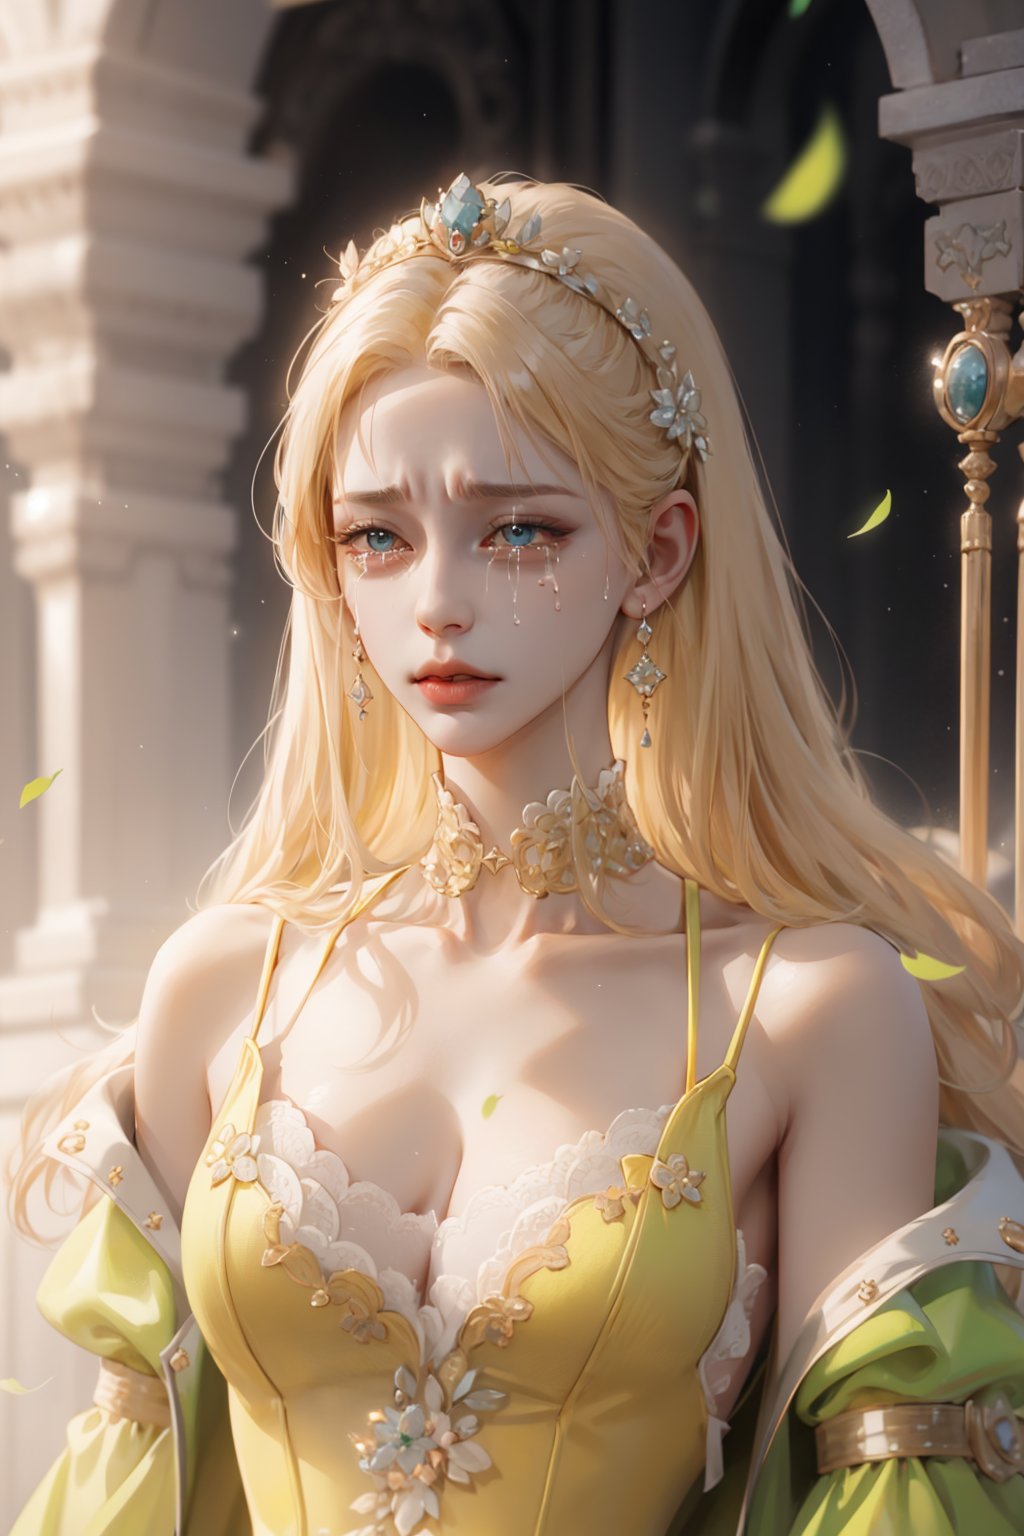 (asterpiece:1.2, best quality), (Soft light), (shiny skin), 1woman, eyelashes, collarbone, victorian, tosca eyes, blonde_long_ hair, royalty background, crying, side look, yellow dress, formal dress